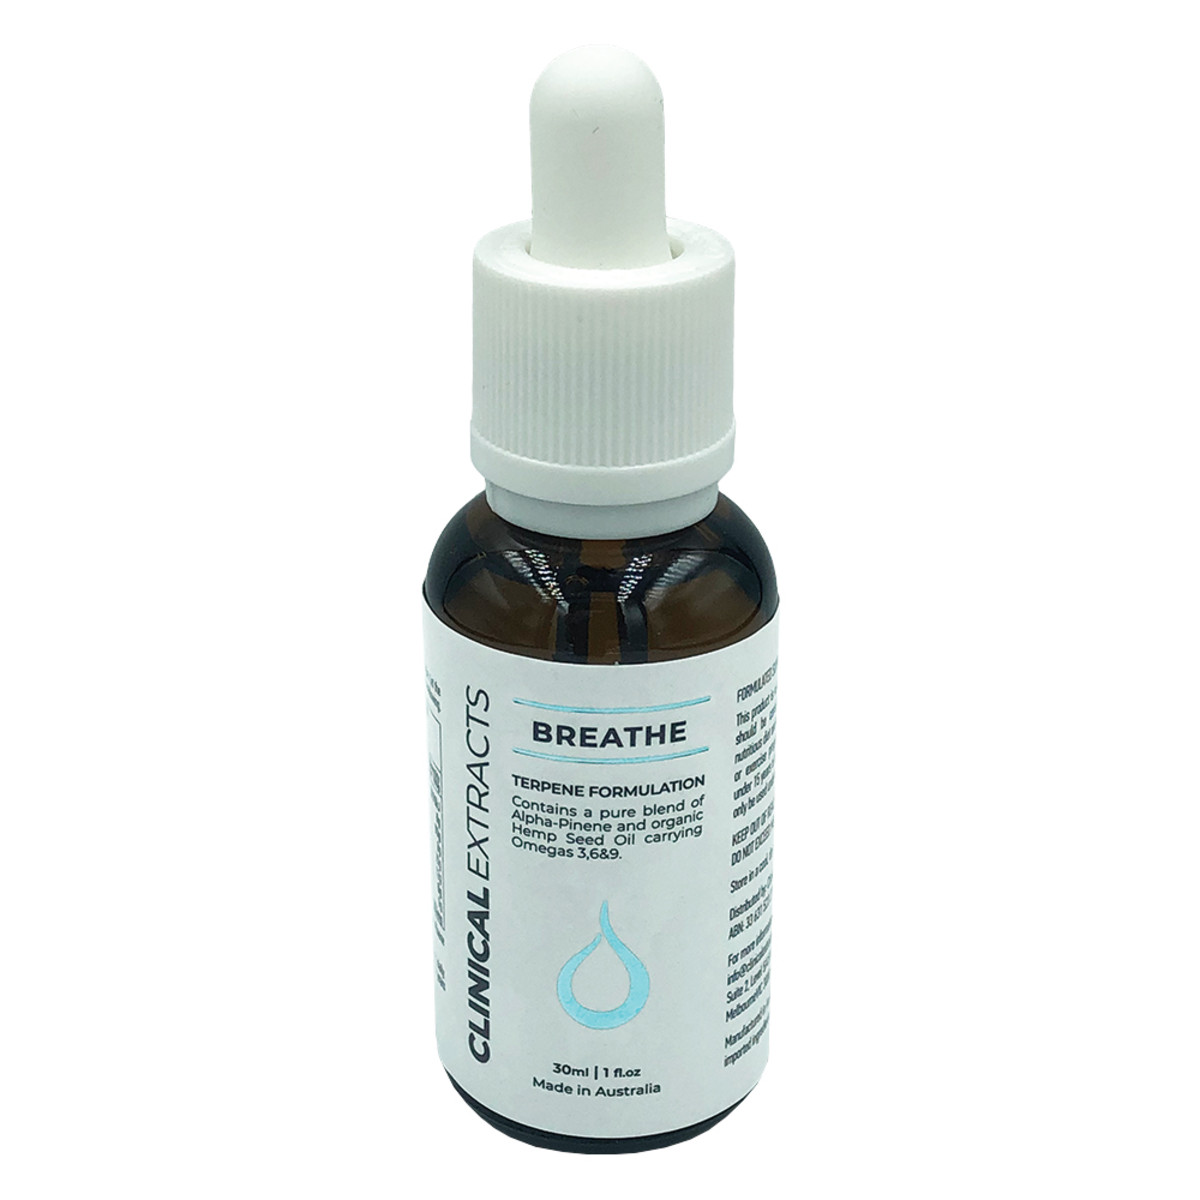 CLINICAL EXTRACTS - Terpene Formulation Breathe 30ml